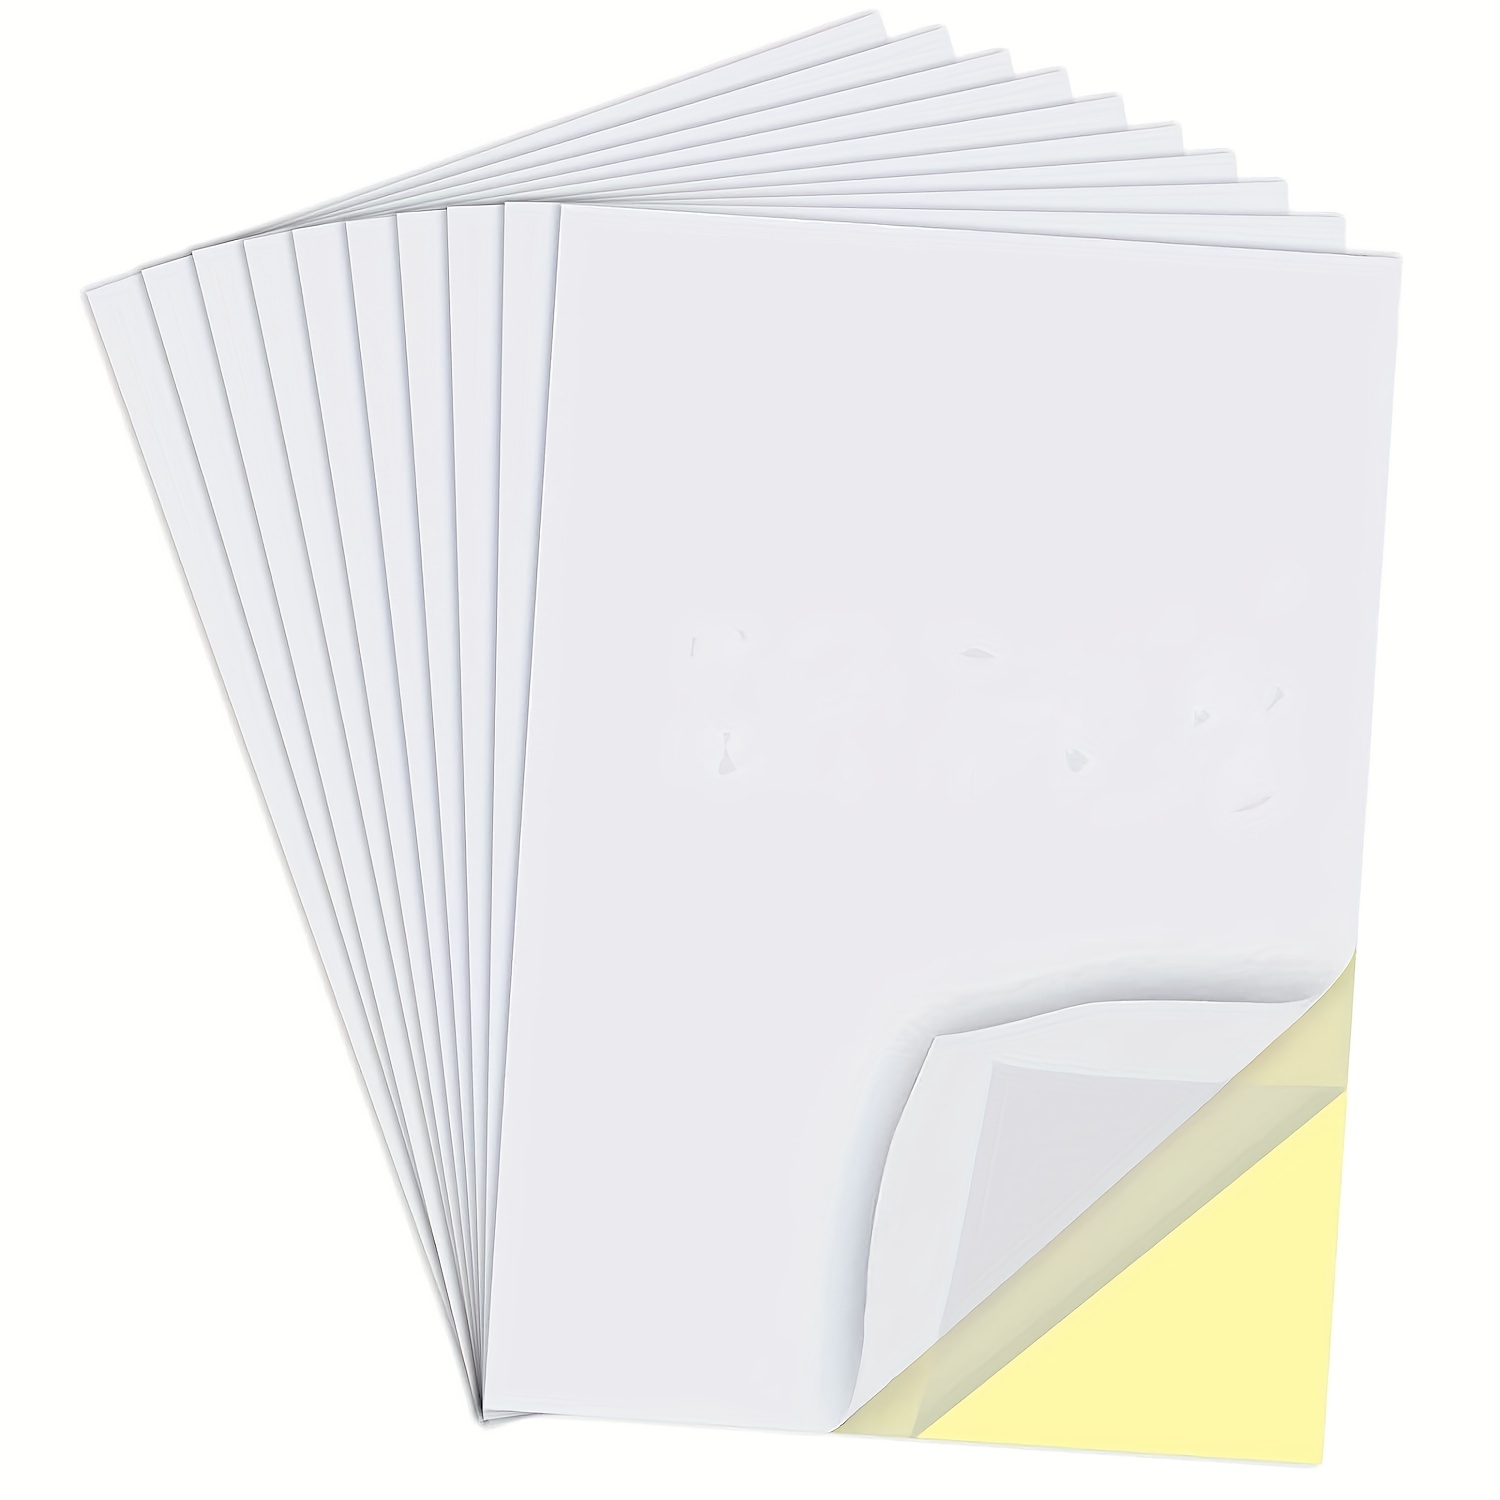 Cuttable Double Sided Adhesive Foam Sheets Stickers for DIY Adding